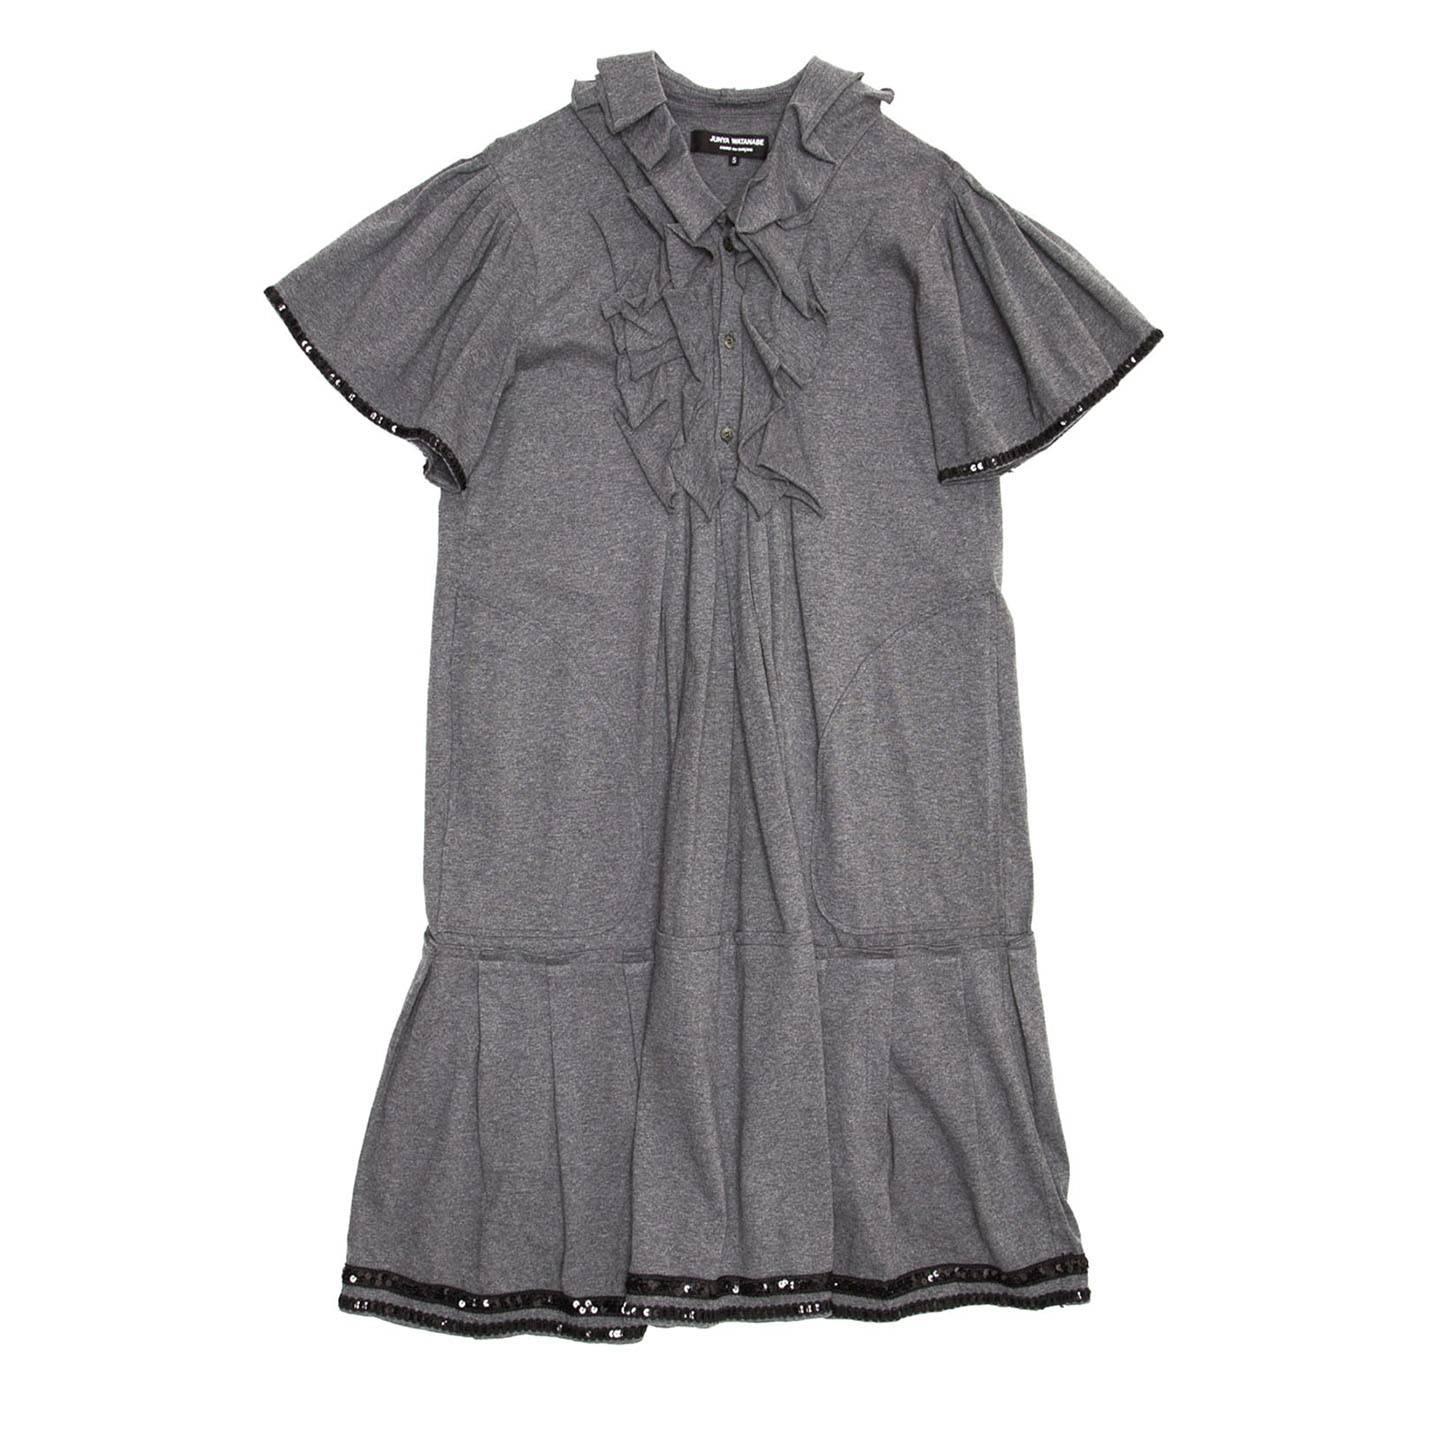 Grey cotton jersey dress with raw edge frills to decorate the collar and bib detail. The skirt part is pleated with a 70's style and the bottom is decorated with two black sequined ribbons. The sleeves are short, gathered at top shoulder and